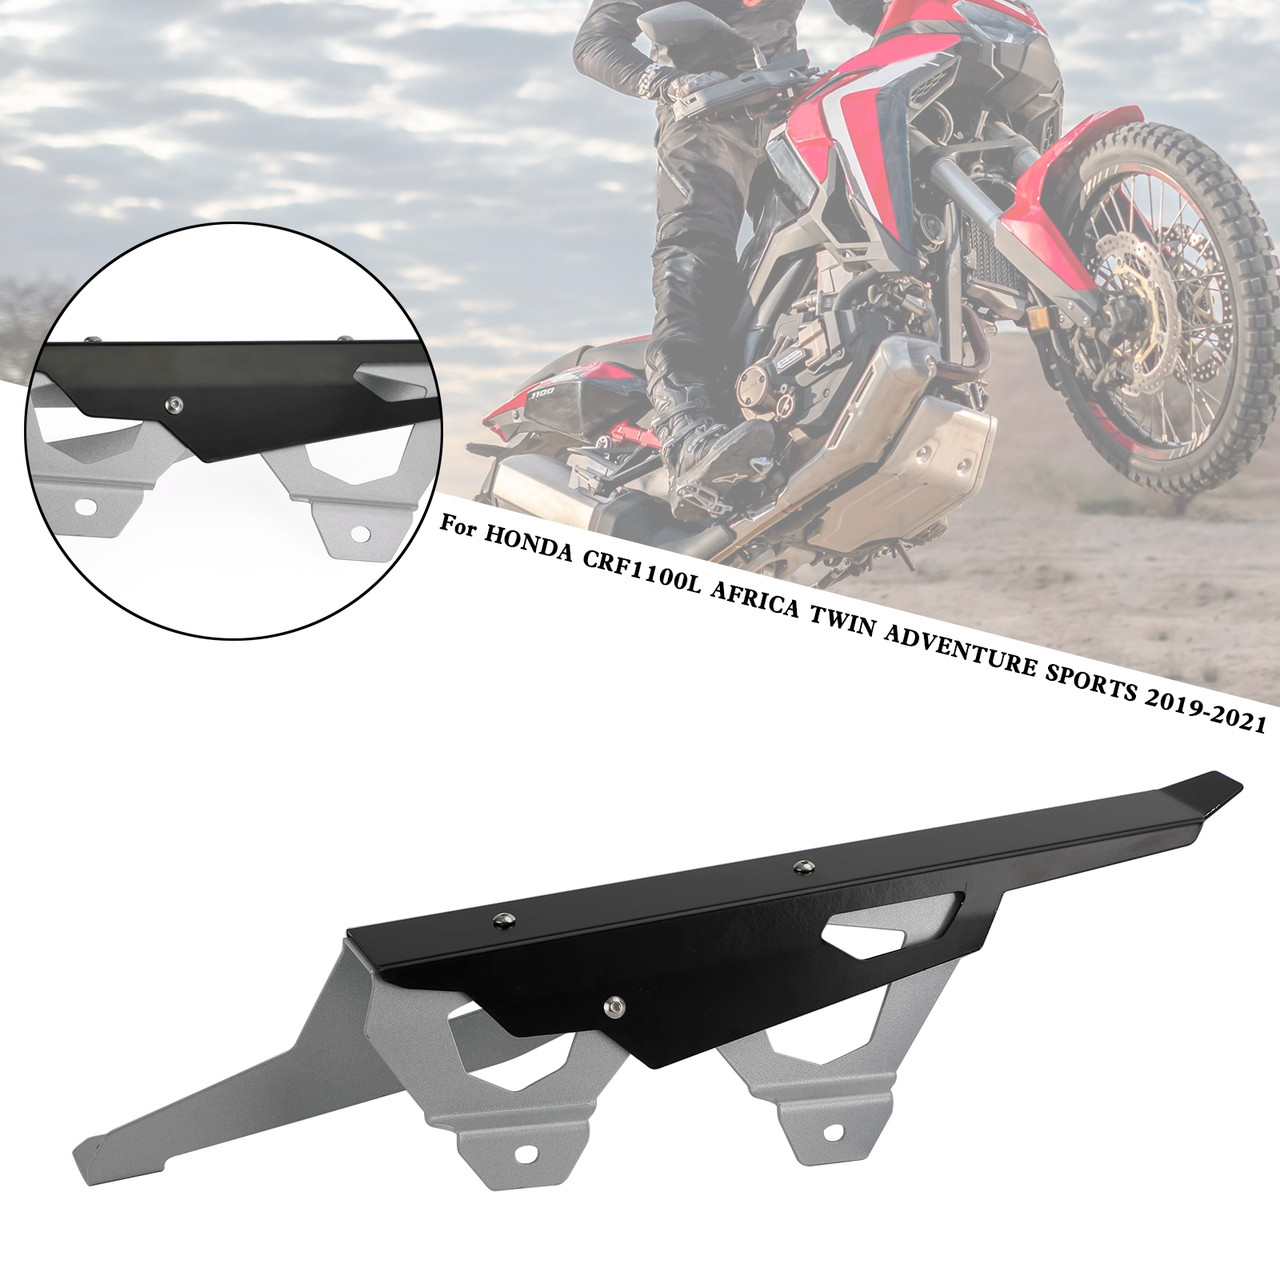 Sprocket Chain Guard Cover For HONDA CRF1100L AFRICA TWIN ADVENTURE SPORTS